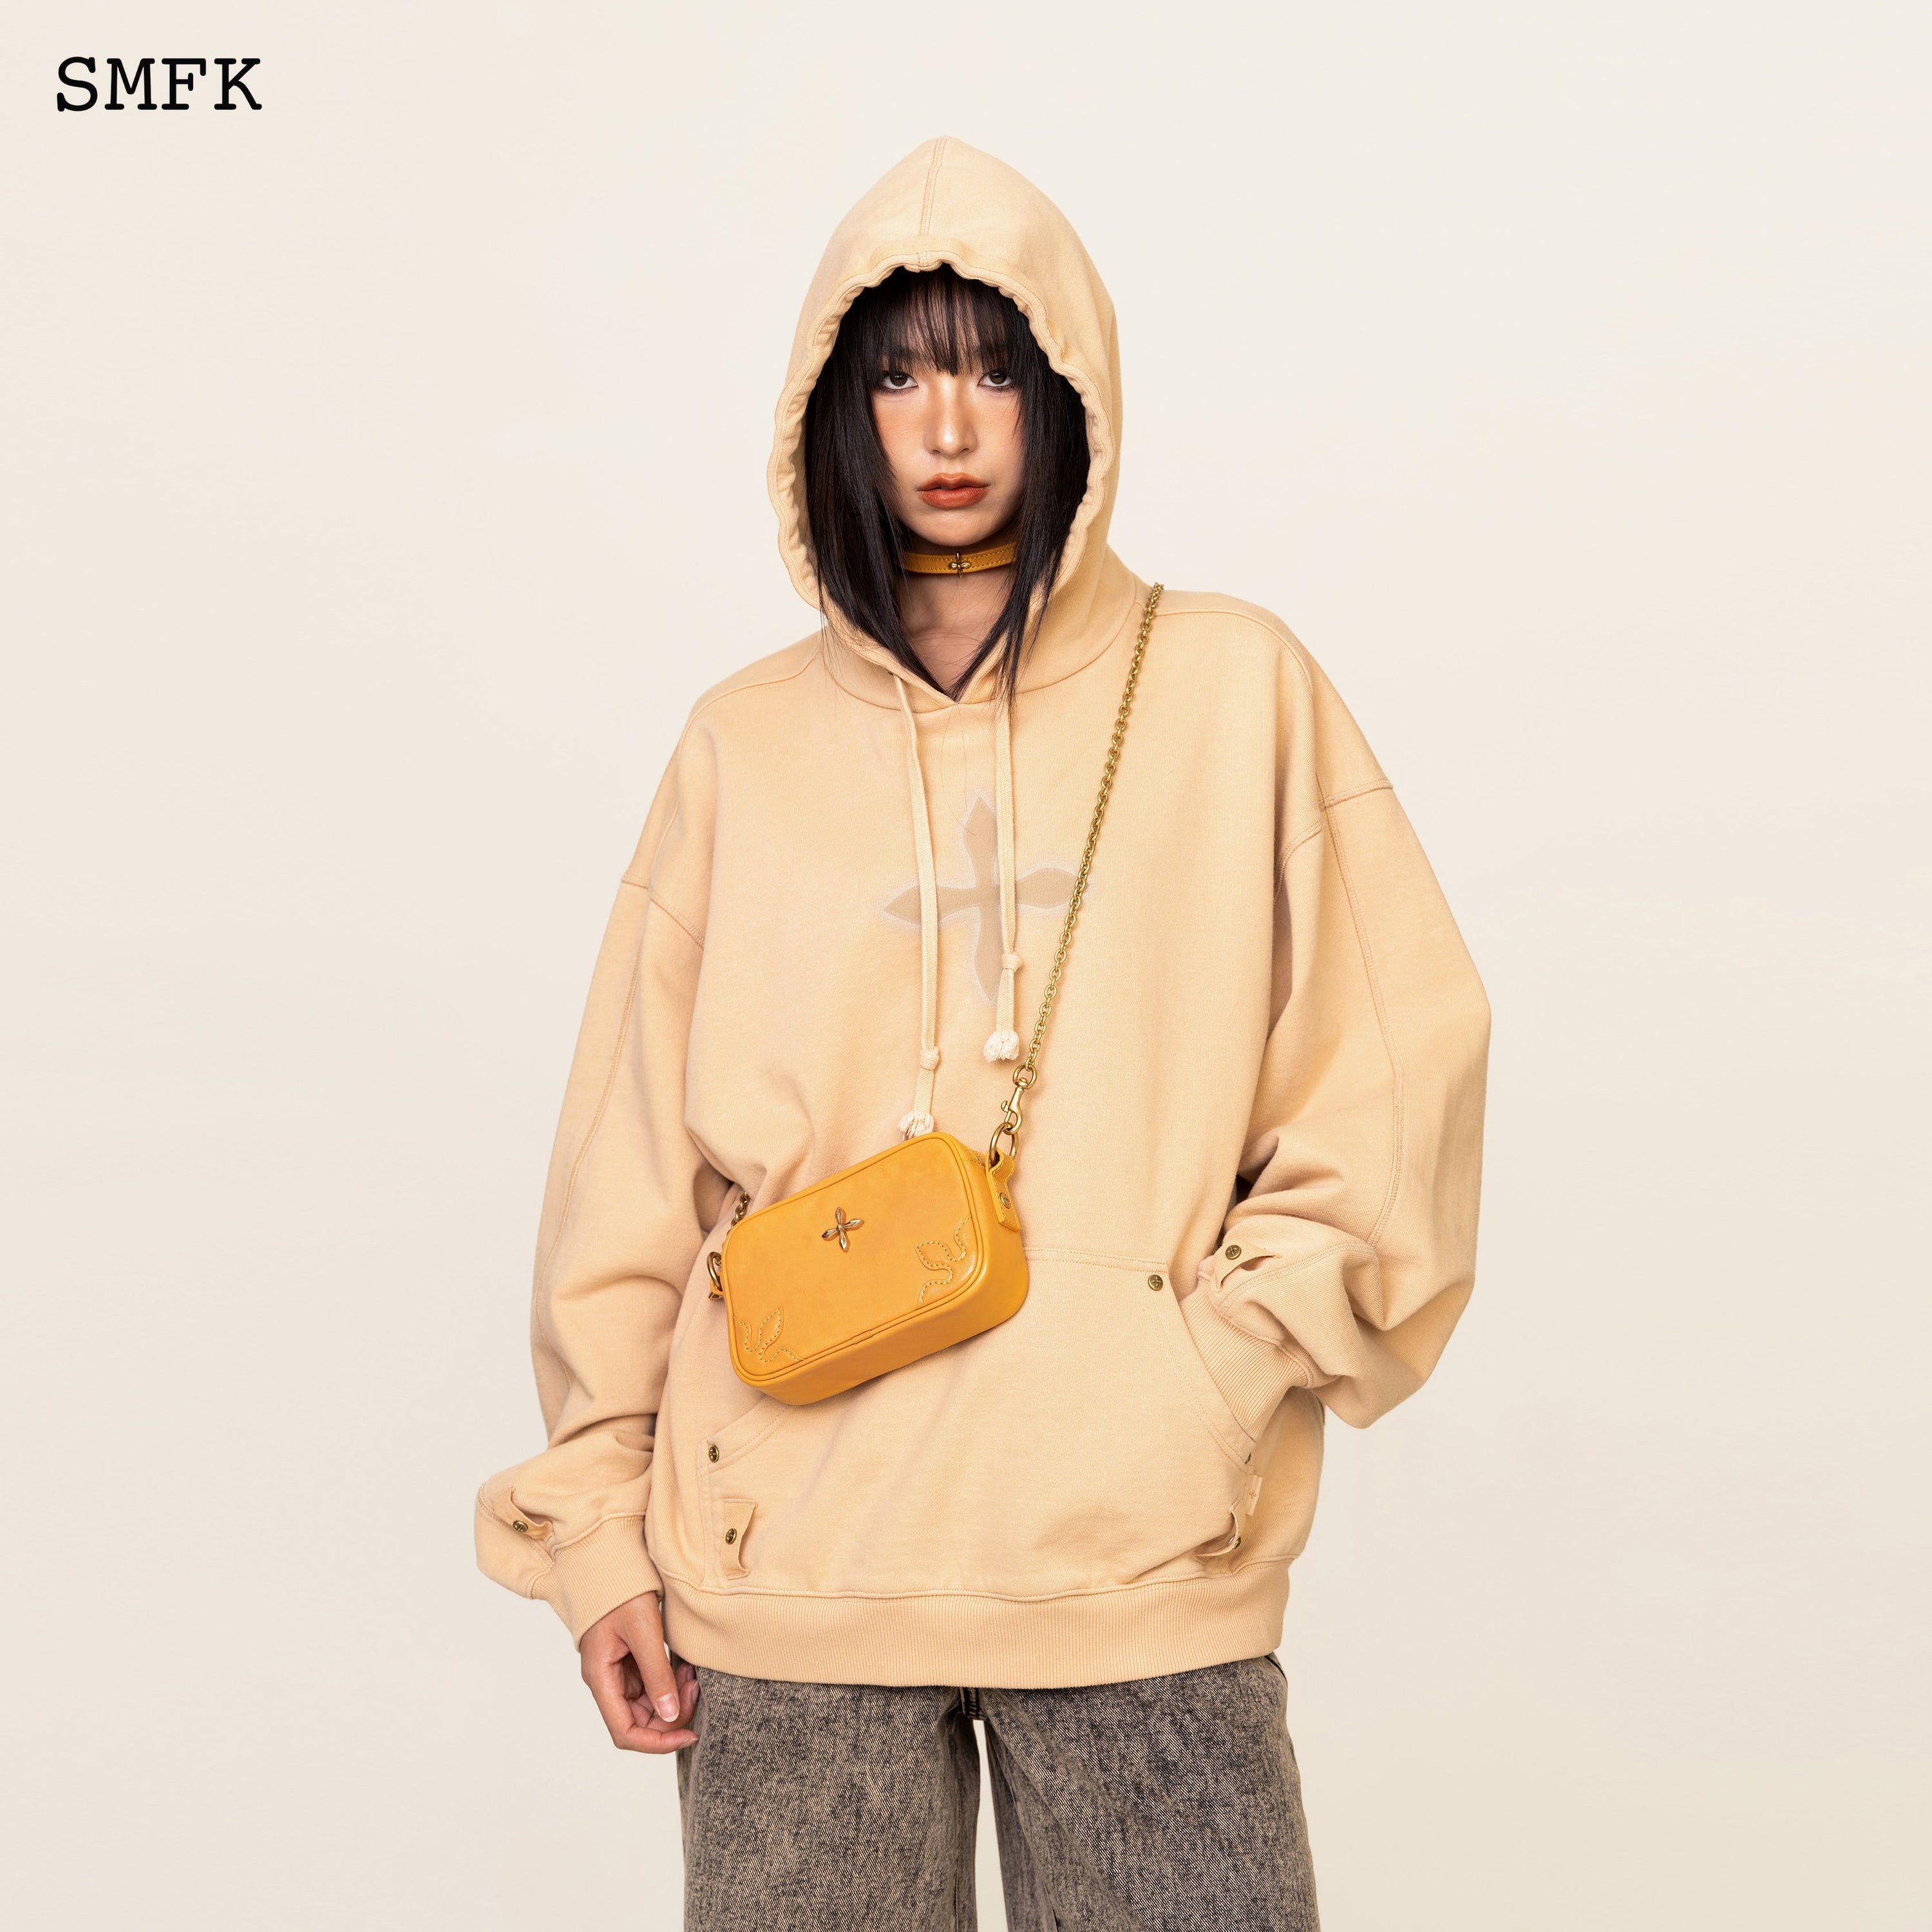 Compass Adventure Small Chain Bag in Cheese - SMFK Official